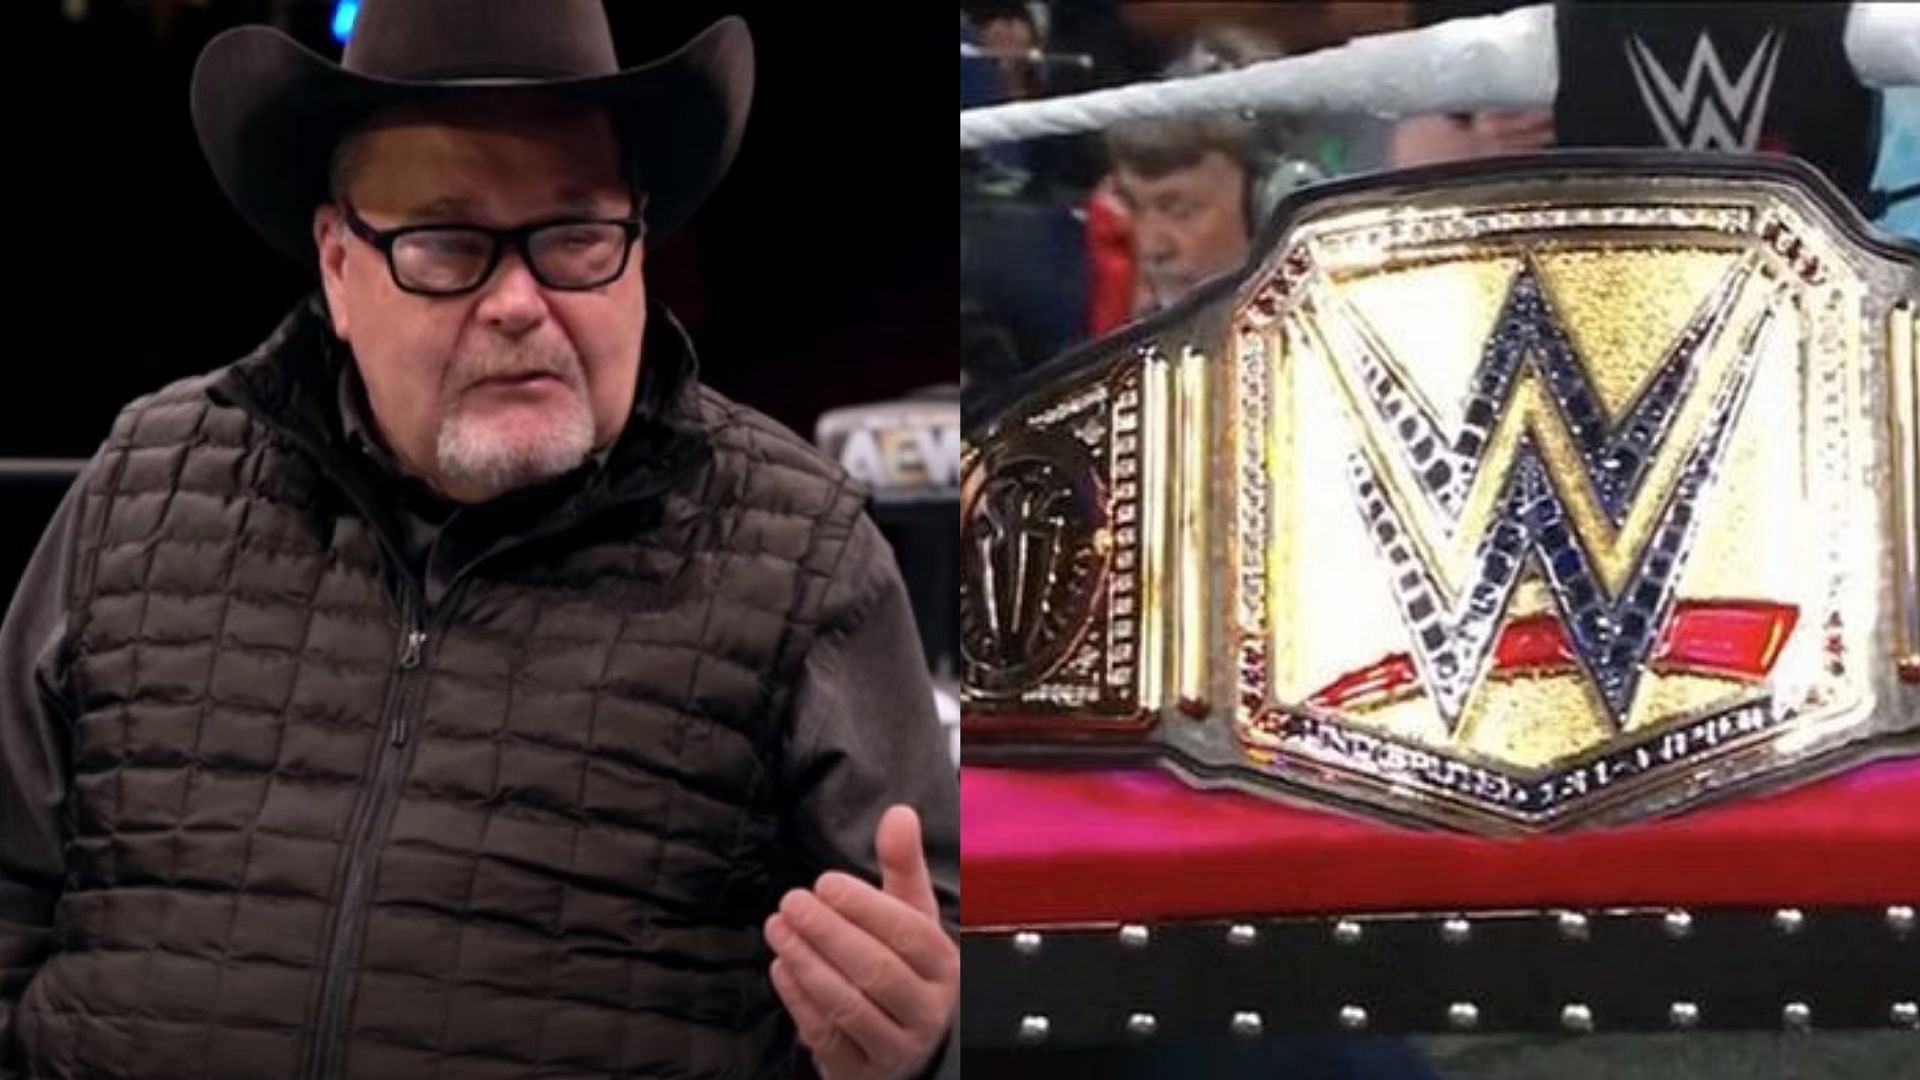 Jim Ross says 5-time WWE Champion is beneficial for AEW